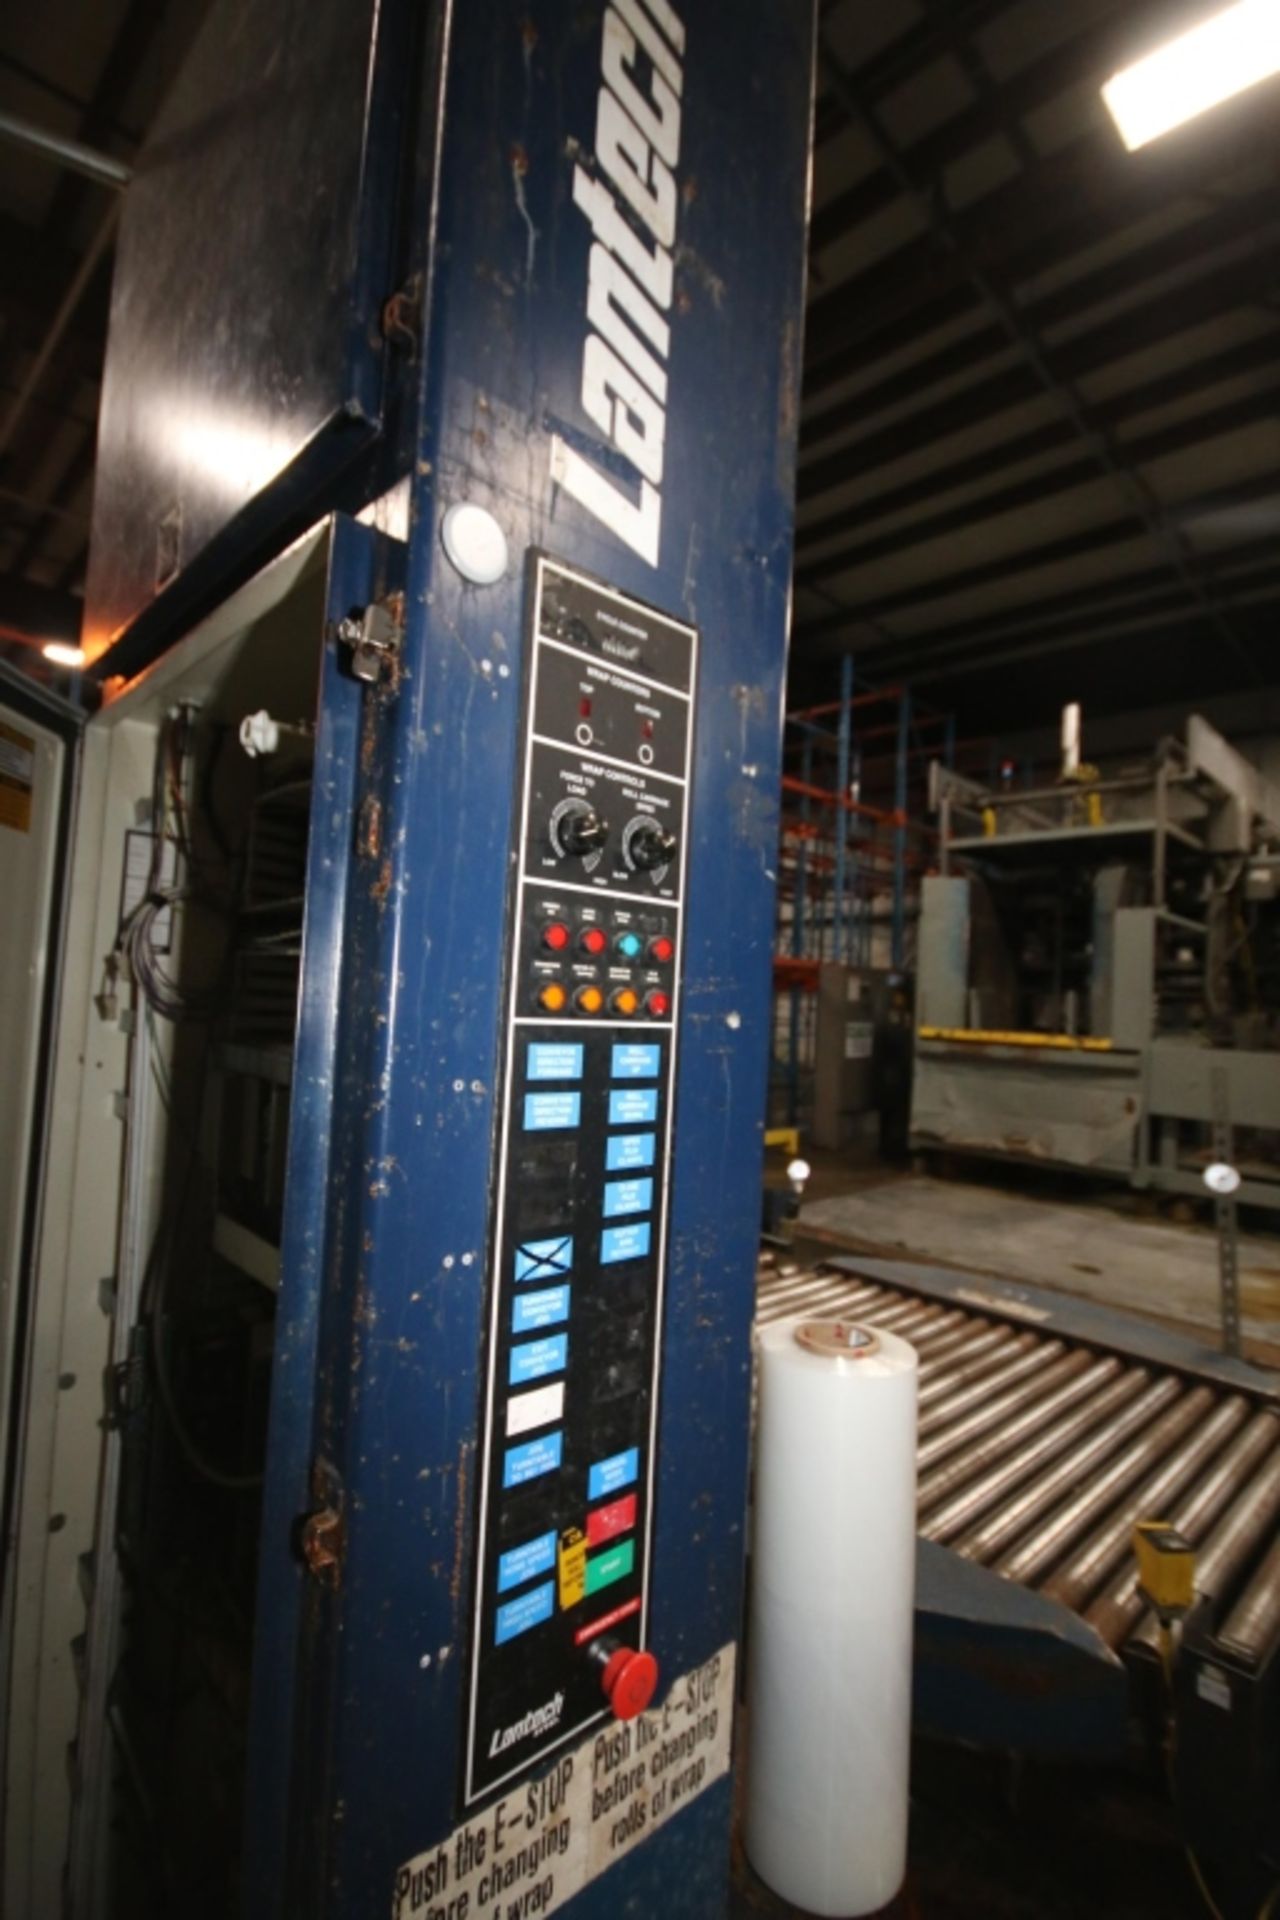 Lantech Model EH1 Automatic Pallet Stretch Wrap Machine: Includes 6'6" Diameter Rotary Turn Table - Image 4 of 5